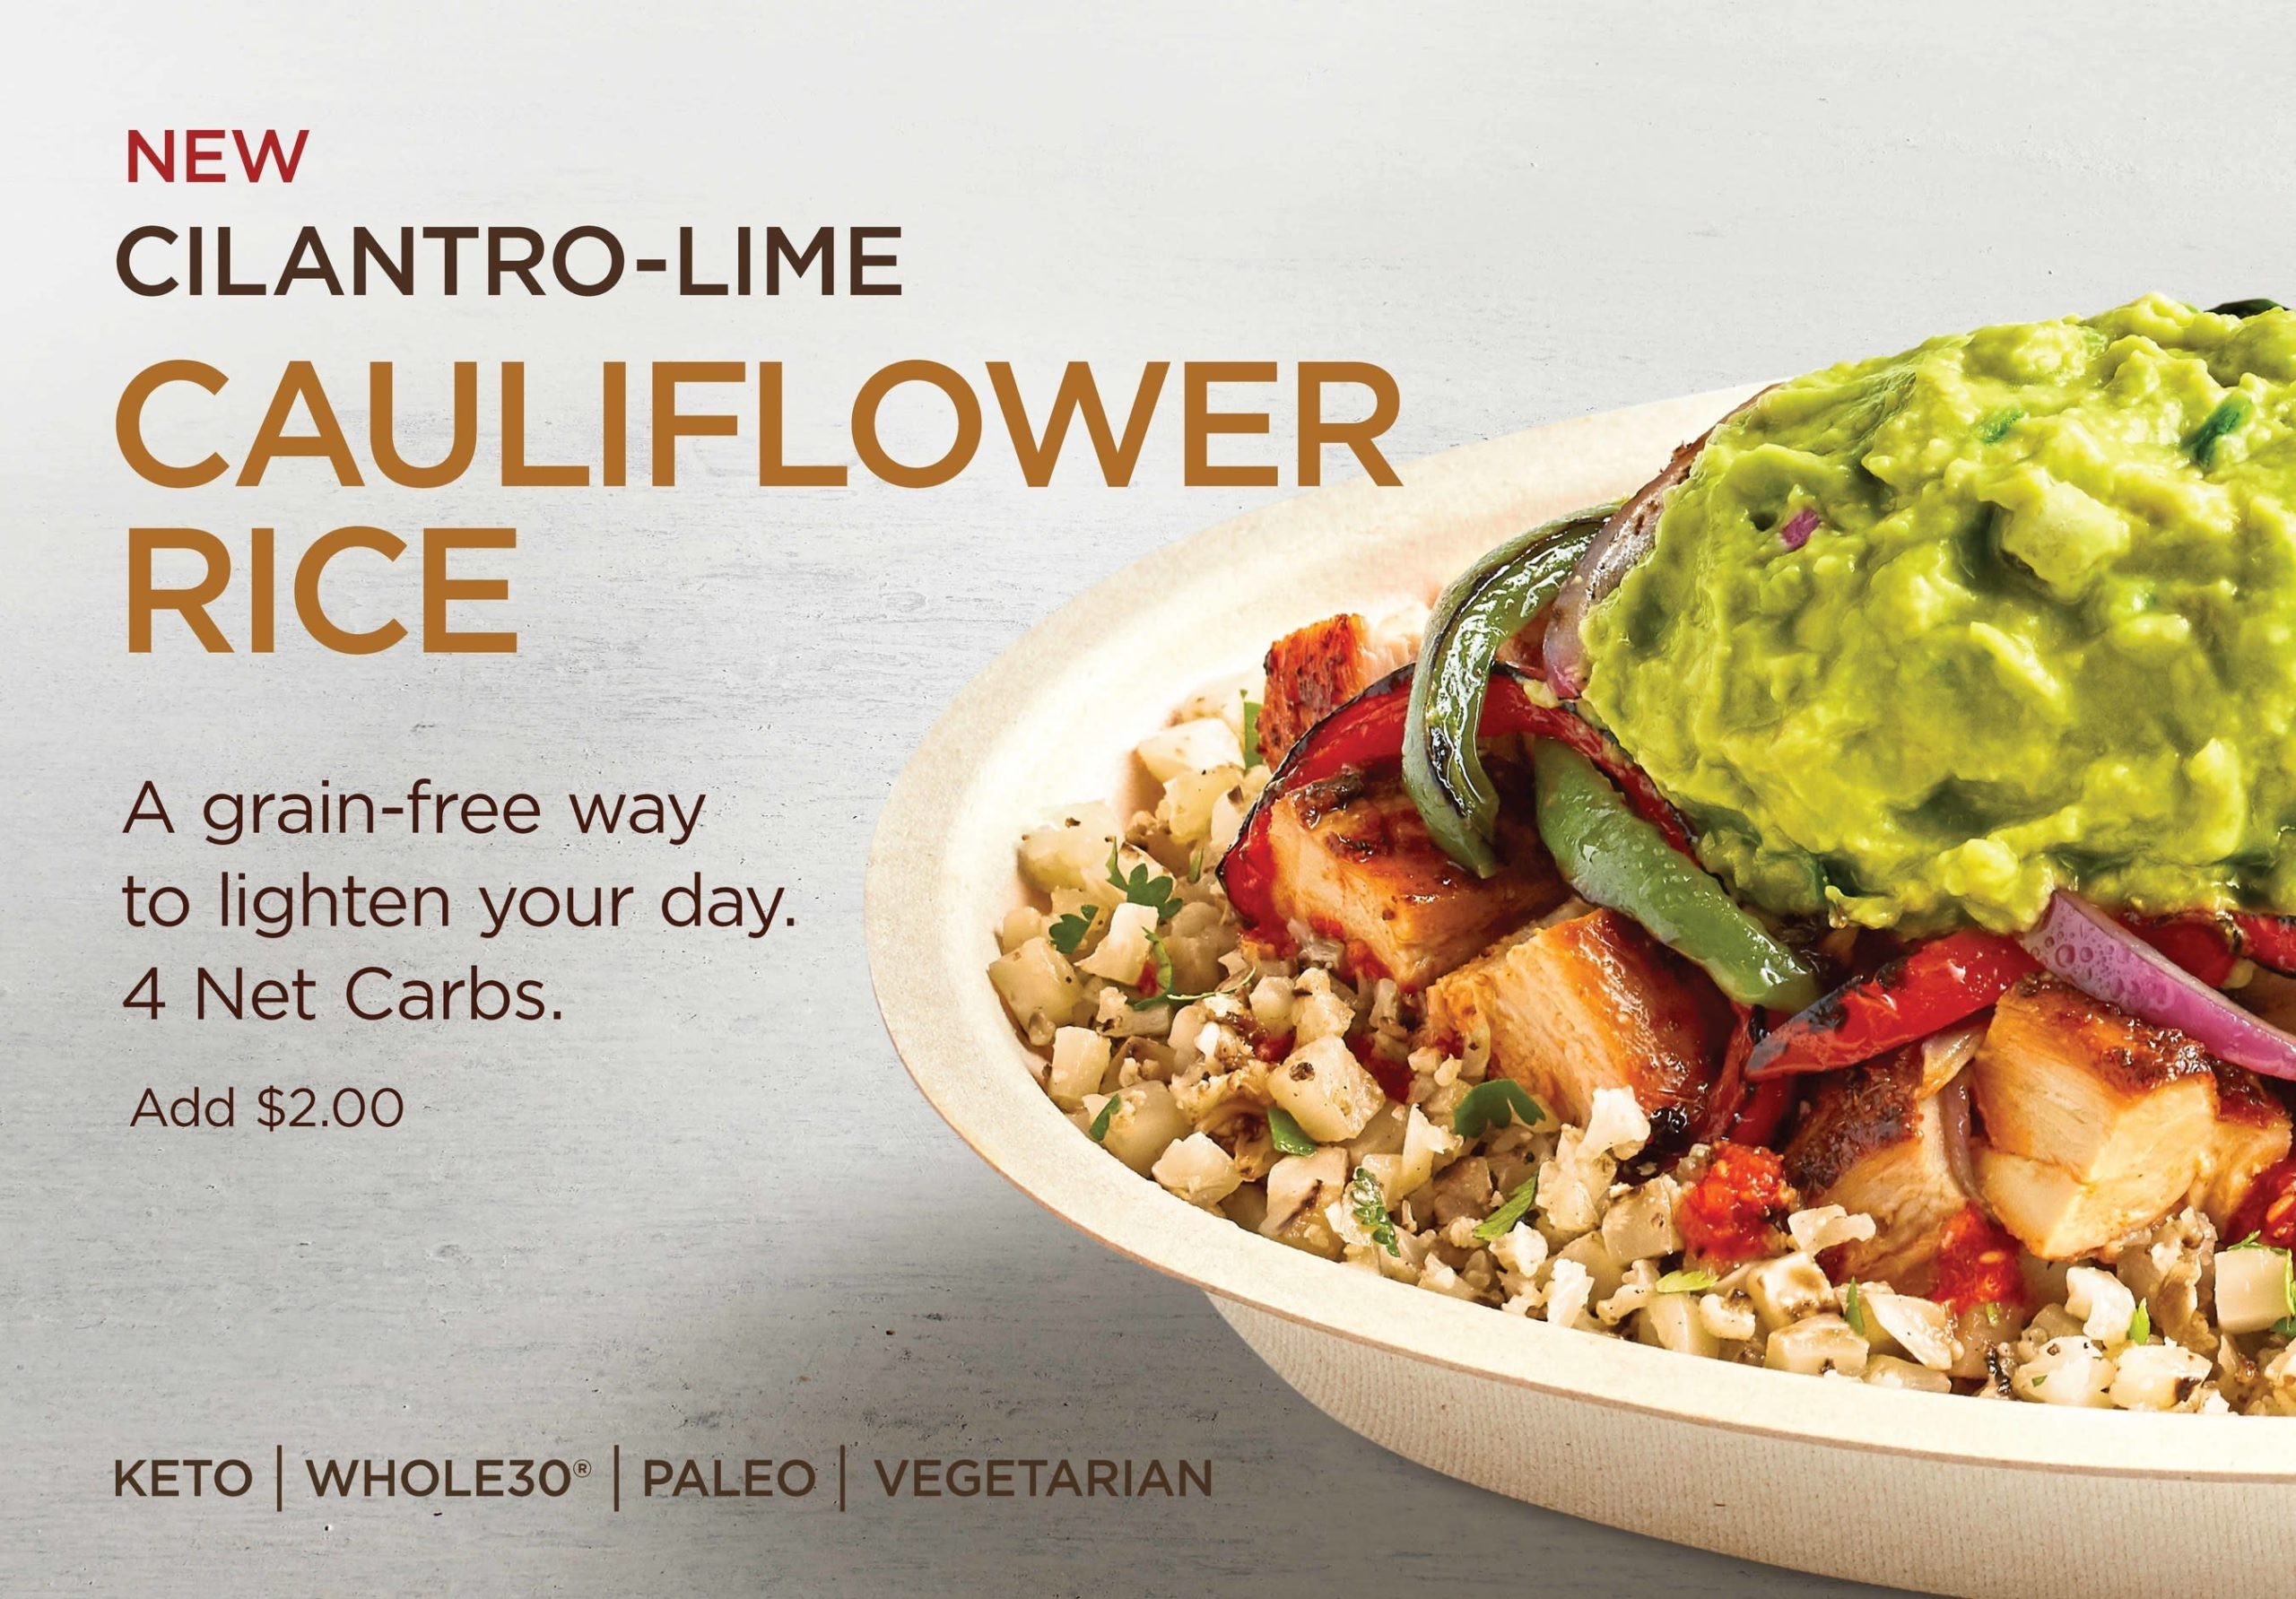 Chipotle will take a look at cauliflower rice as customers observe grain-free diets